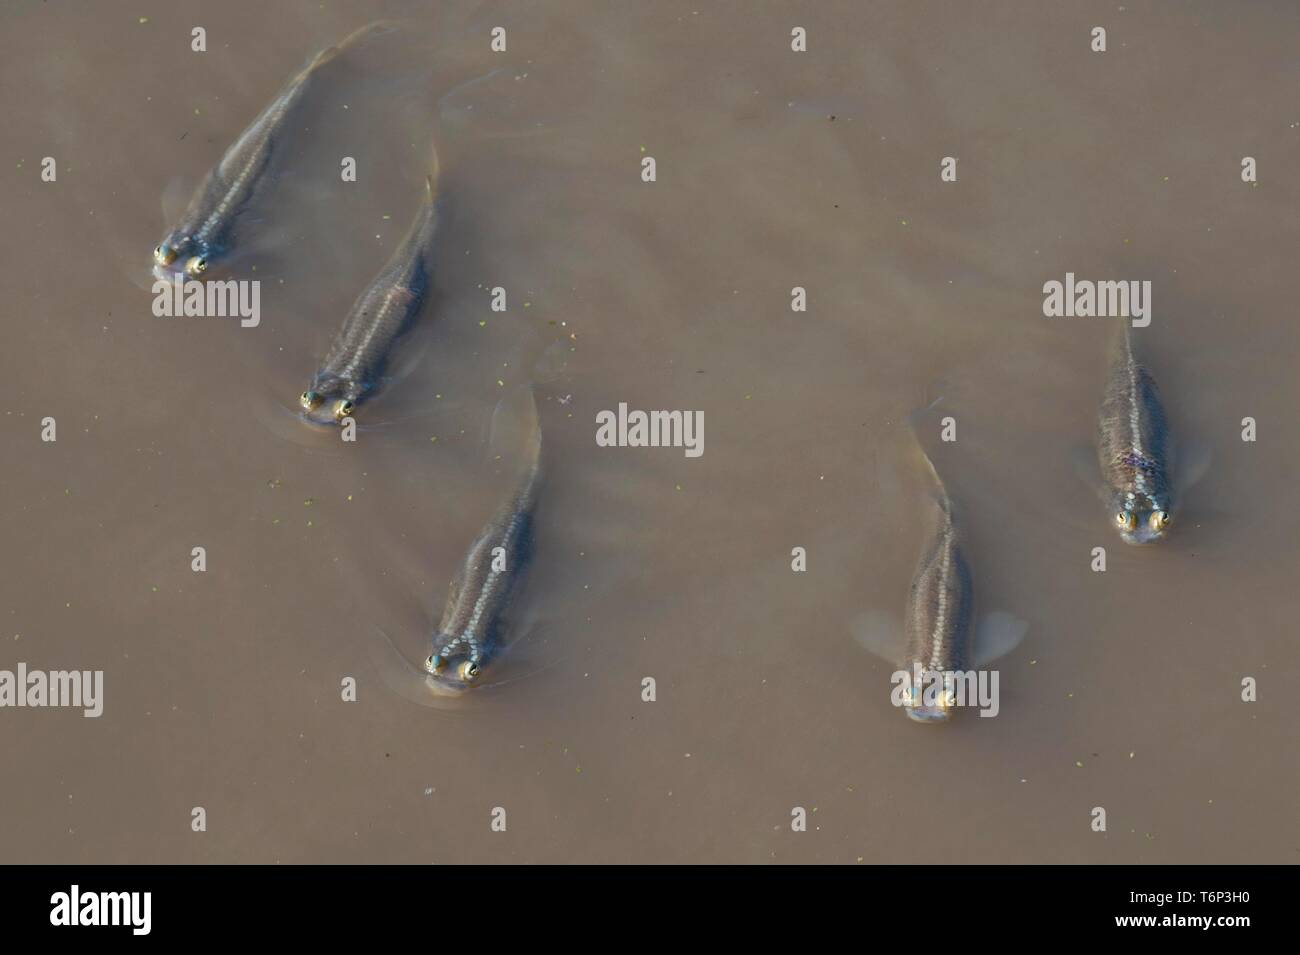 Four-eyed fishes, (Anableps) swimming in Suriname river, Paramaribo, Suriname Stock Photo